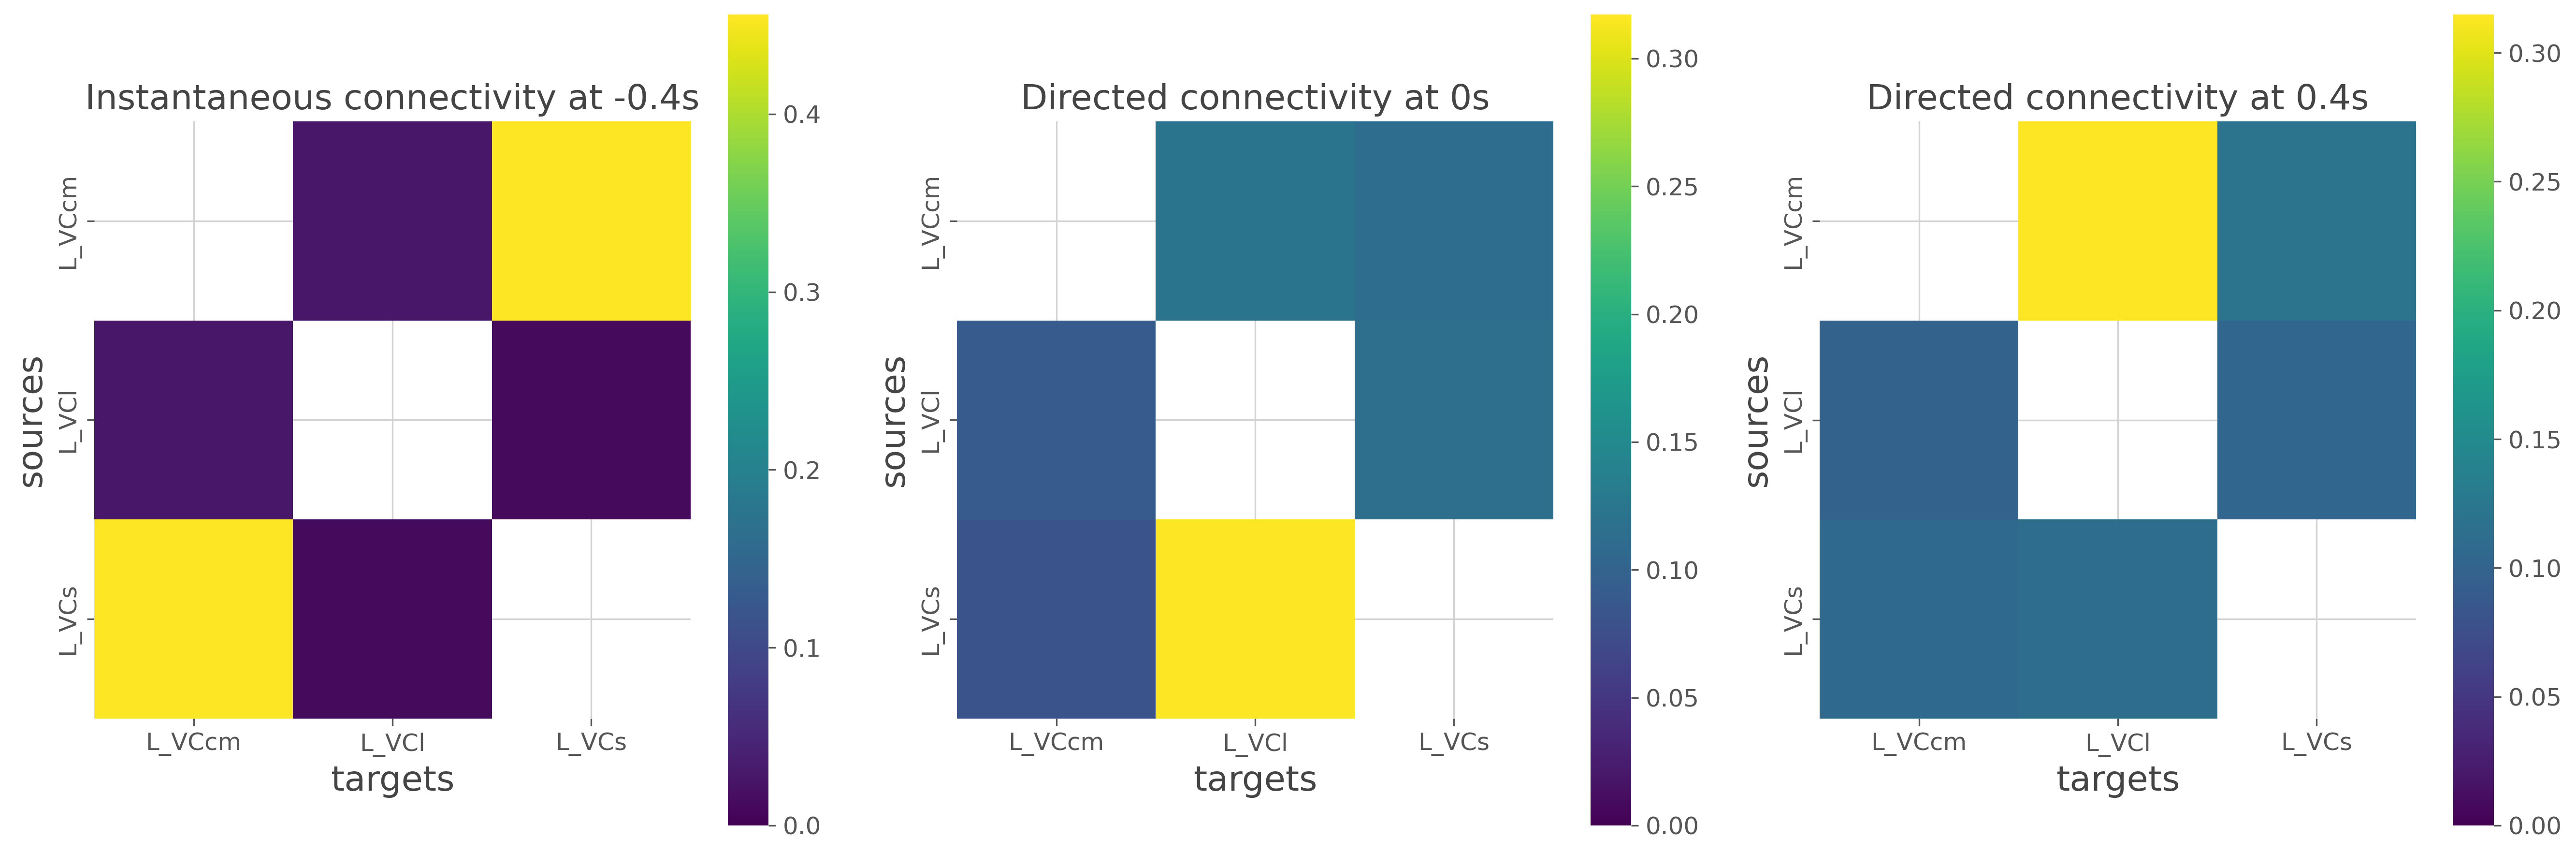 Instantaneous connectivity at -0.4s, Directed connectivity at 0s, Directed connectivity at 0.4s